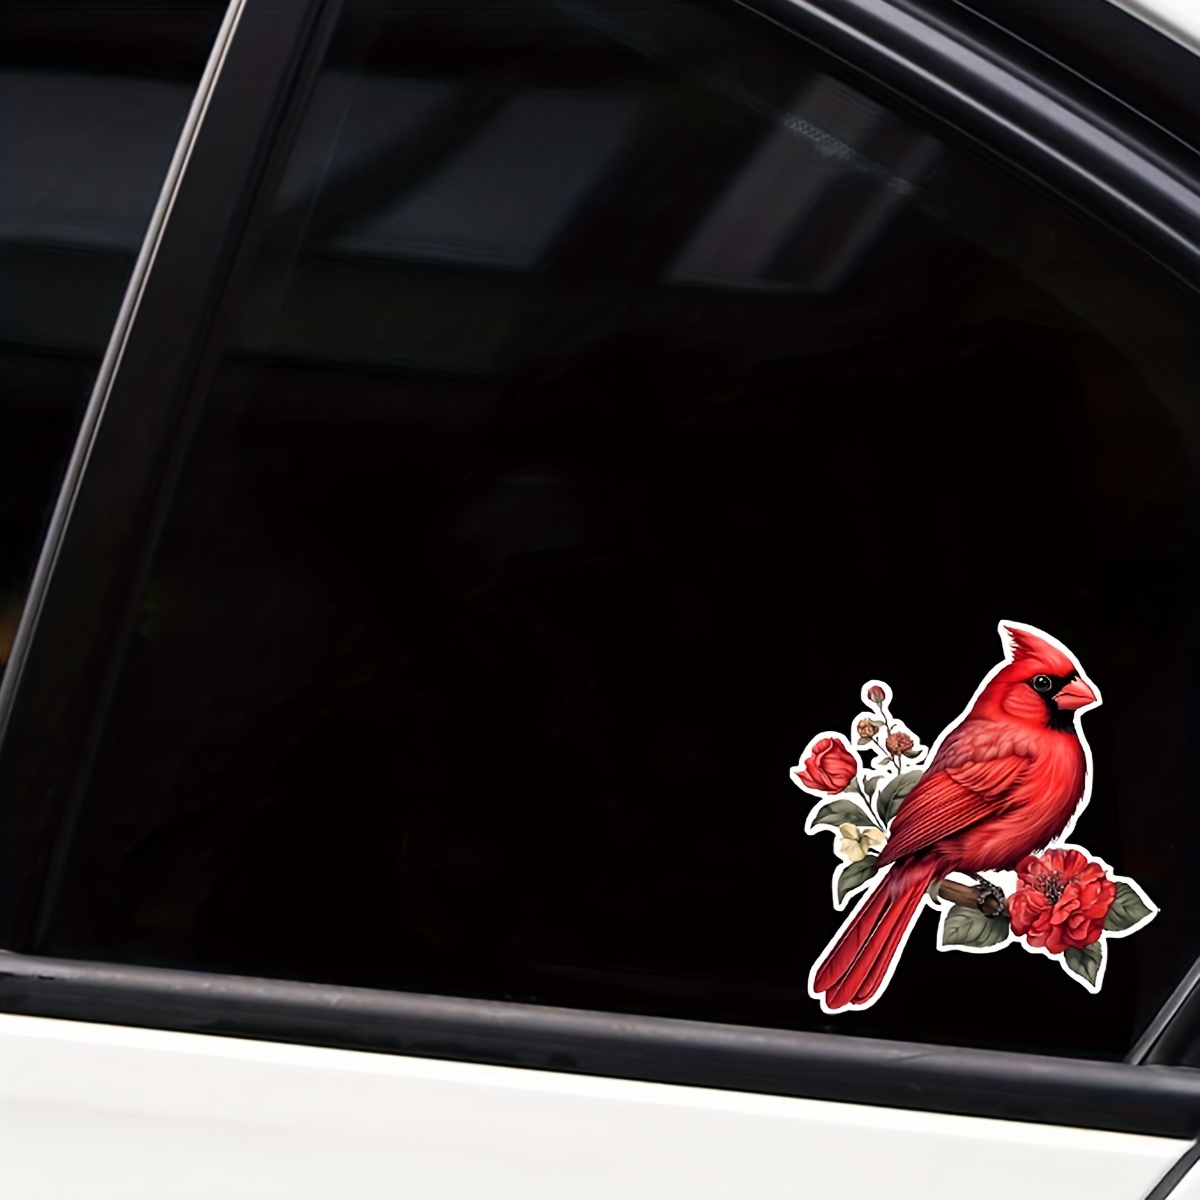 

1pc Red Parrot Funny Vinyl Sticker For Cars, Trucks, Suvs, Window Bumpers, Laptops